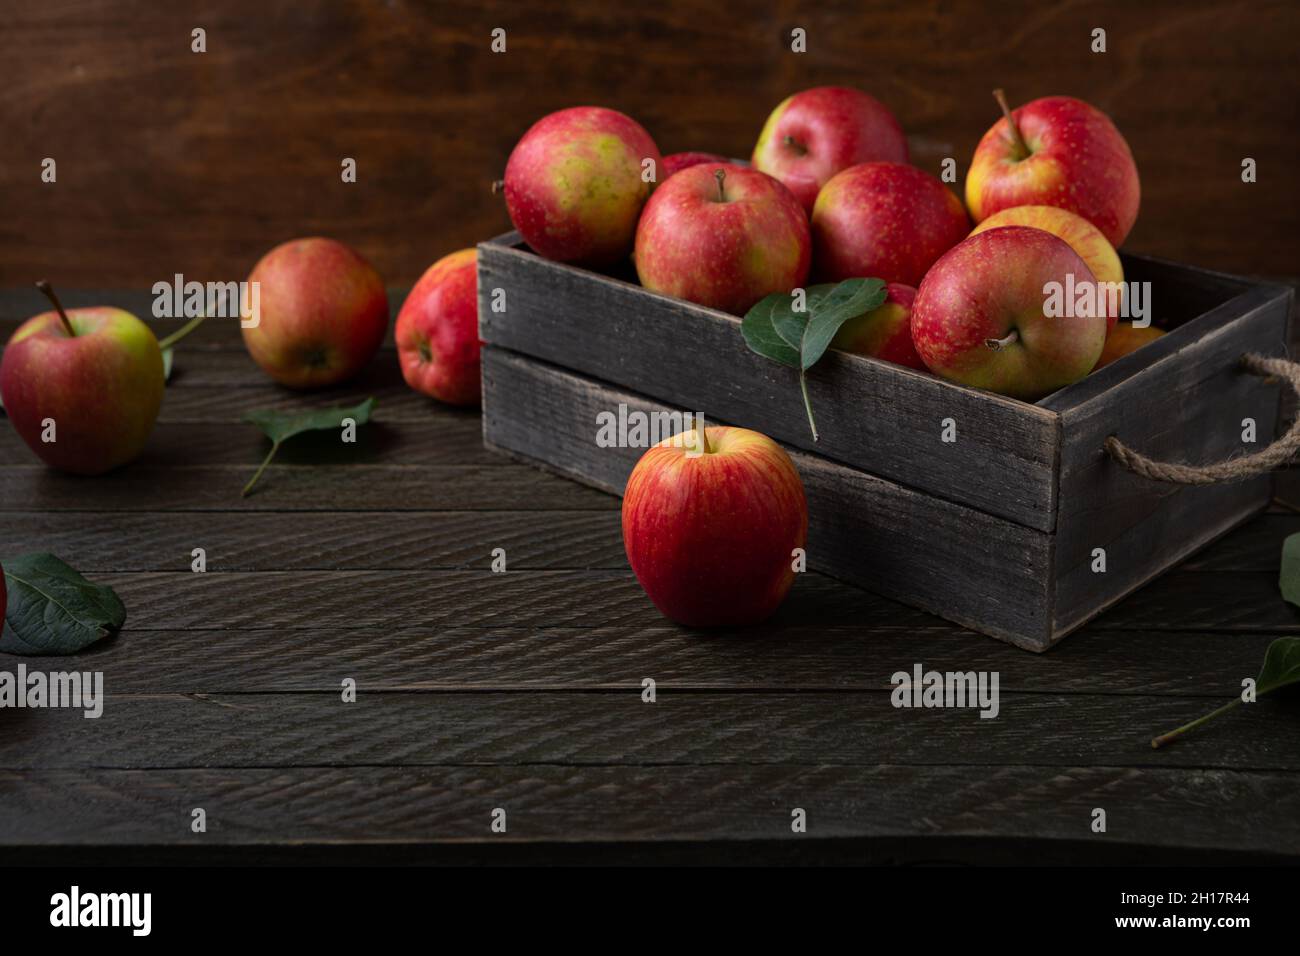 Apples in wooden crate harvest concept on wooden table Stock Photo